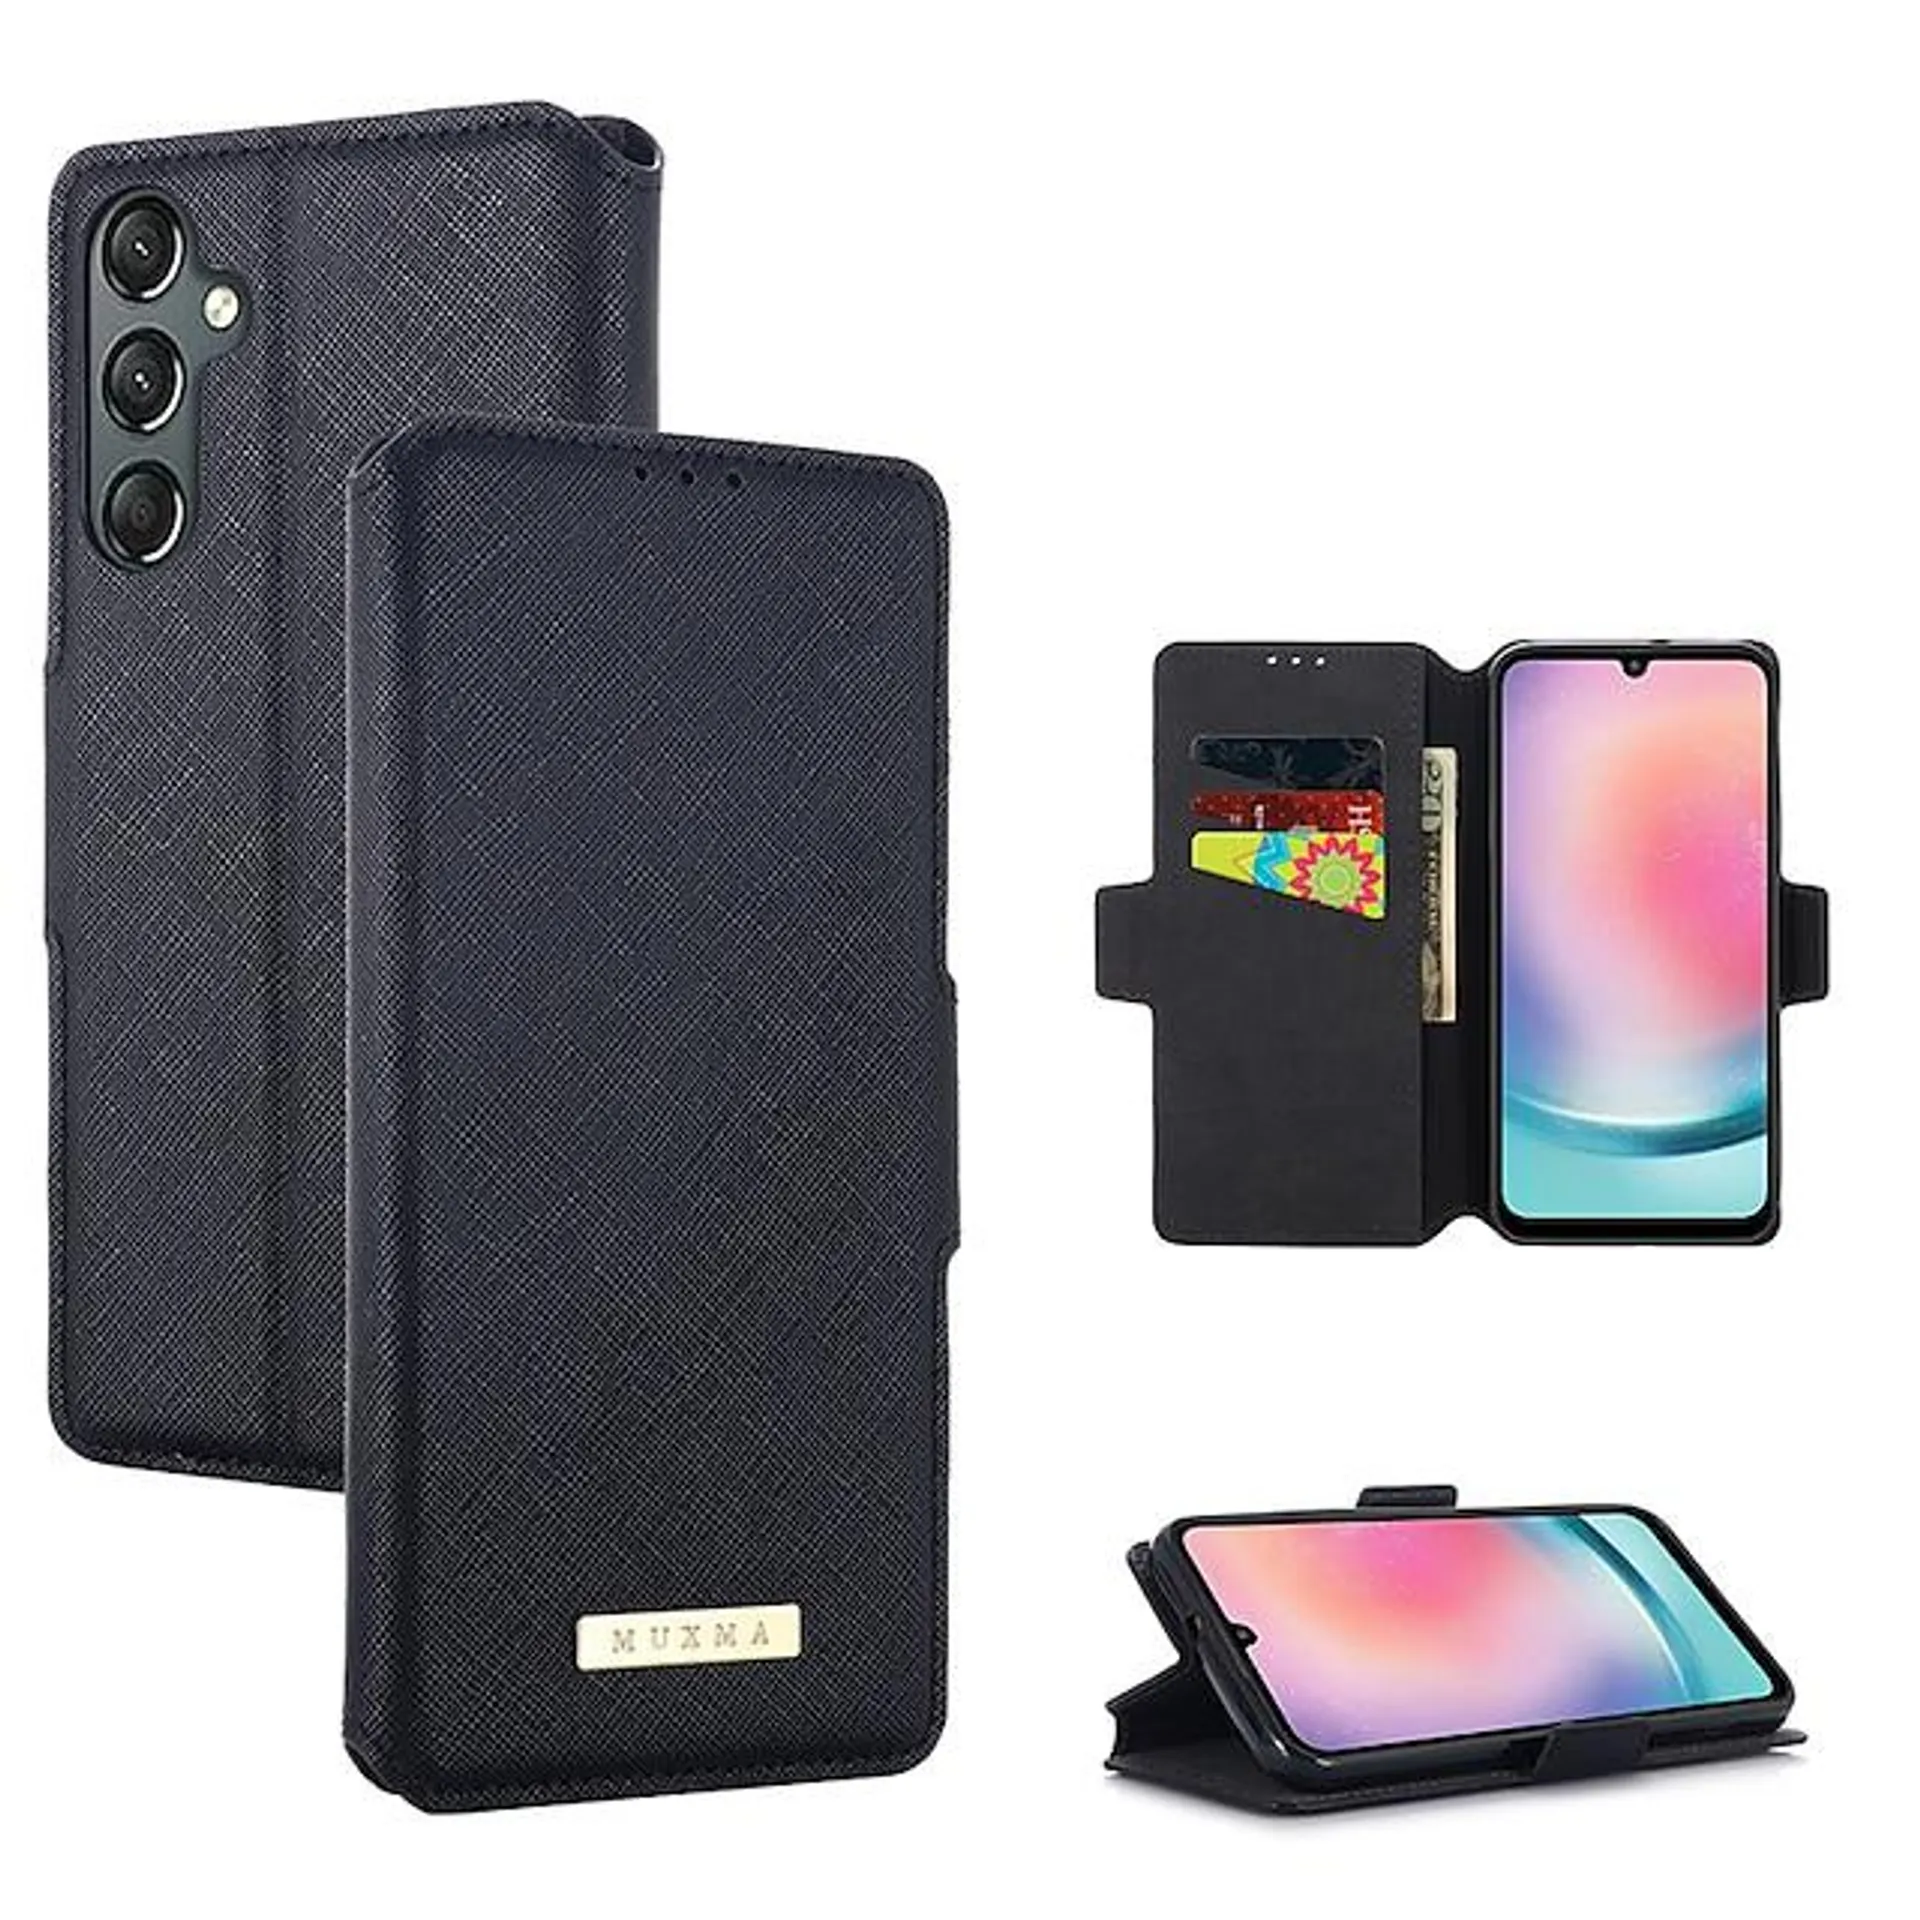 Phone Case For Samsung Galaxy S24 S23 S22 S21 S20 Ultra Plus FE A54 A34 A14 A73 A53 A33 A23 A13 A72 A52 A42 Note 20 Ultra Wallet Case With Card Holder Kickstand Shockproof TPU PU Leather